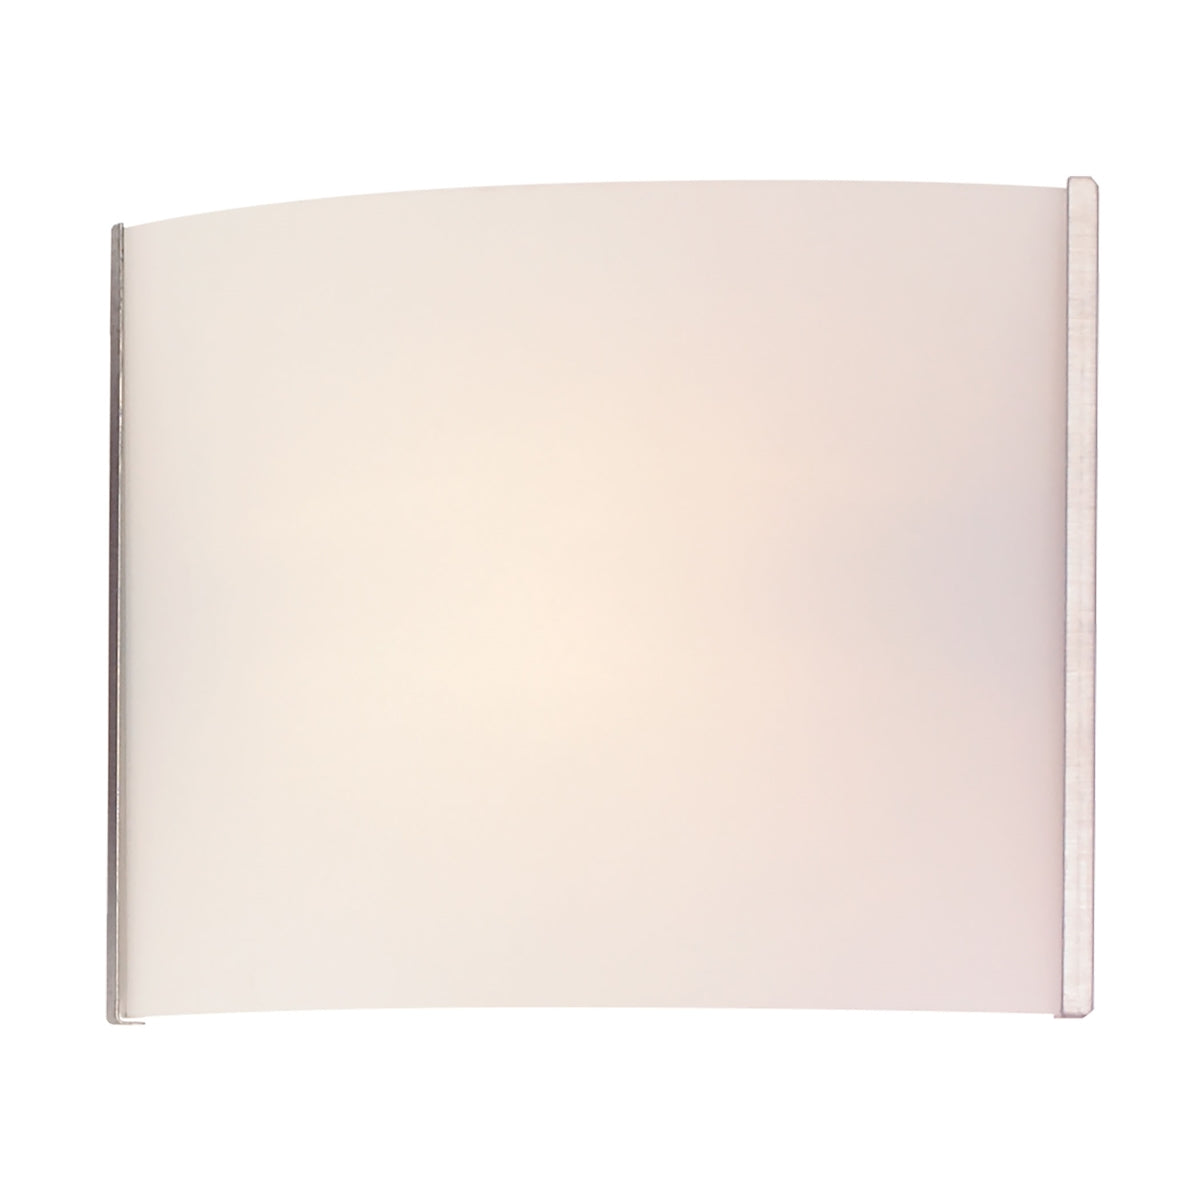 ELK Lighting BV711-10-16 Pannelli 1-Light Vanity Sconce in Stainless Steel with Hand-formed White Opal Glass